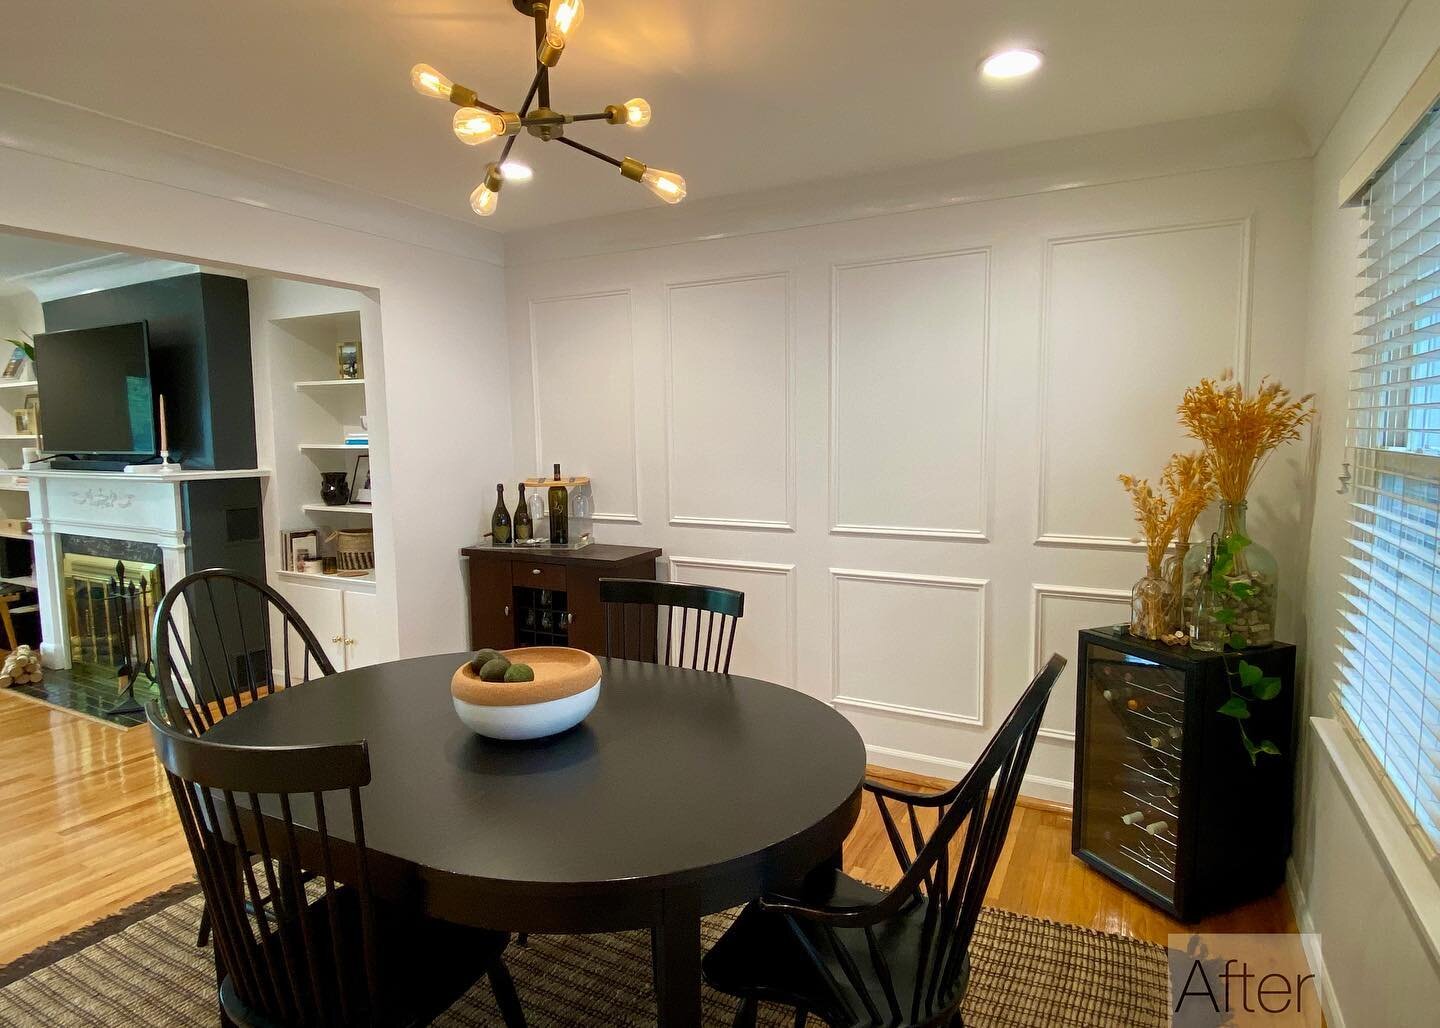 Dining room: After -&gt; Before

Trim accent wall, recessed lighting and fresh paint makes all the difference. 

#fieldstonehomesolutions #homeimprovement #home #renovation #maintenance #remodel #installation #repair #realestate #handyman #handymanse